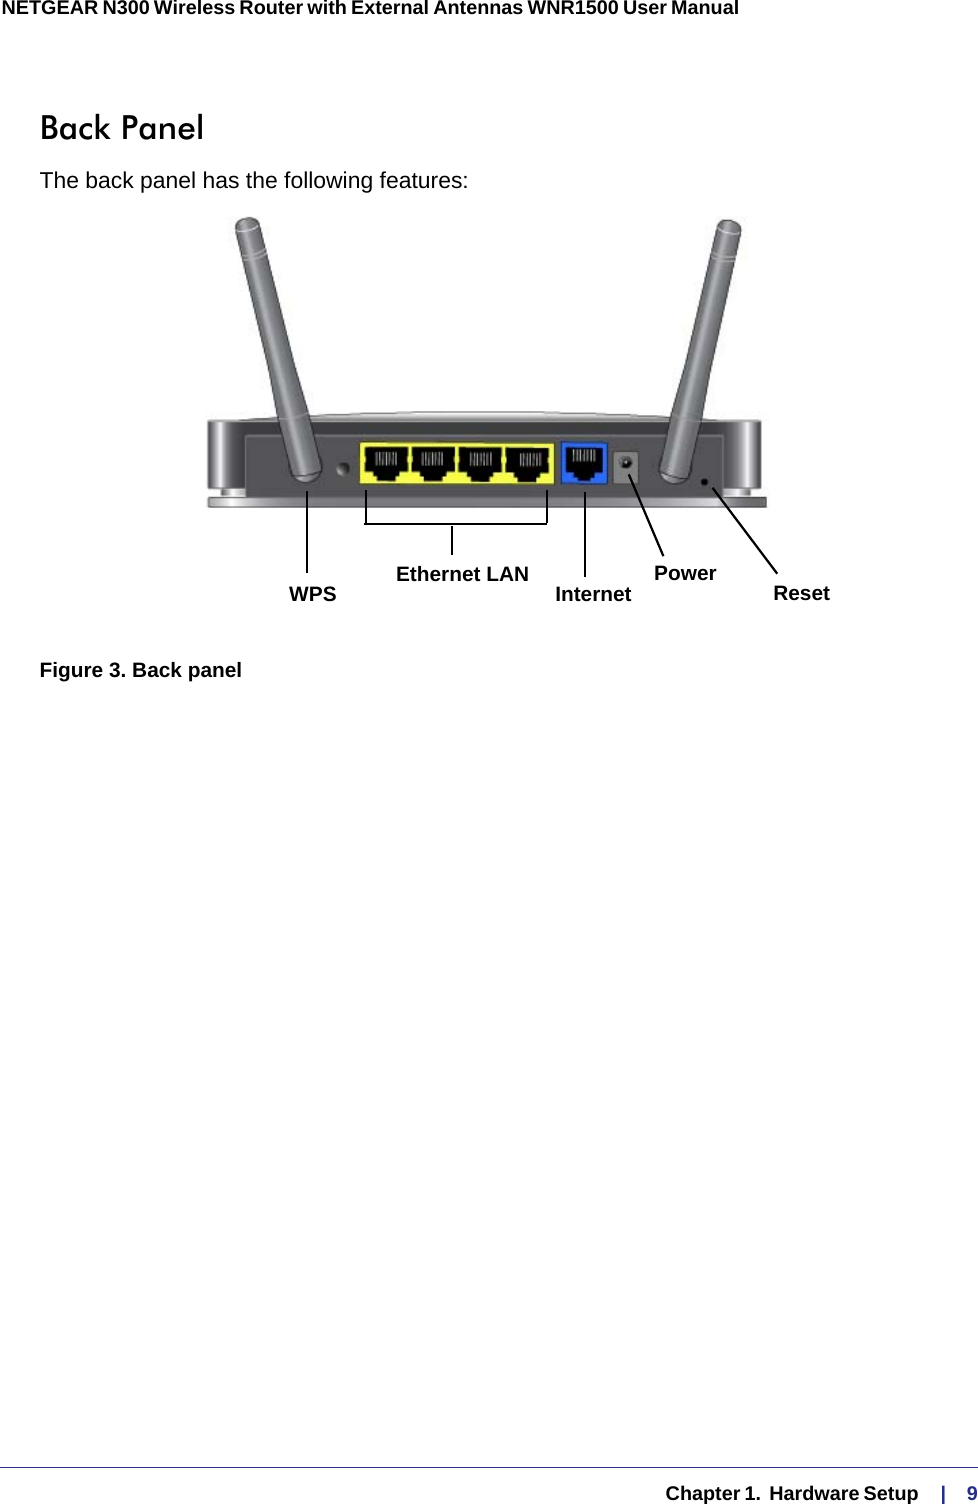   Chapter 1.  Hardware Setup    |    9NETGEAR N300 Wireless Router with External Antennas WNR1500 User Manual Back PanelThe back panel has the following features:WPS Ethernet LAN Internet Power ResetFigure 3. Back panel